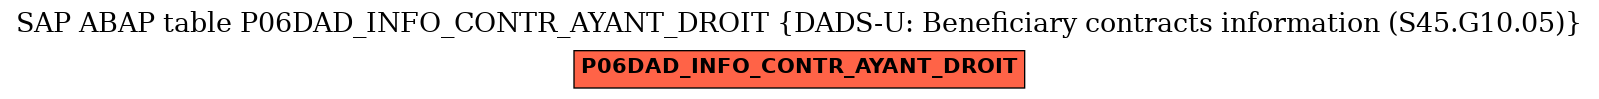 E-R Diagram for table P06DAD_INFO_CONTR_AYANT_DROIT (DADS-U: Beneficiary contracts information (S45.G10.05))